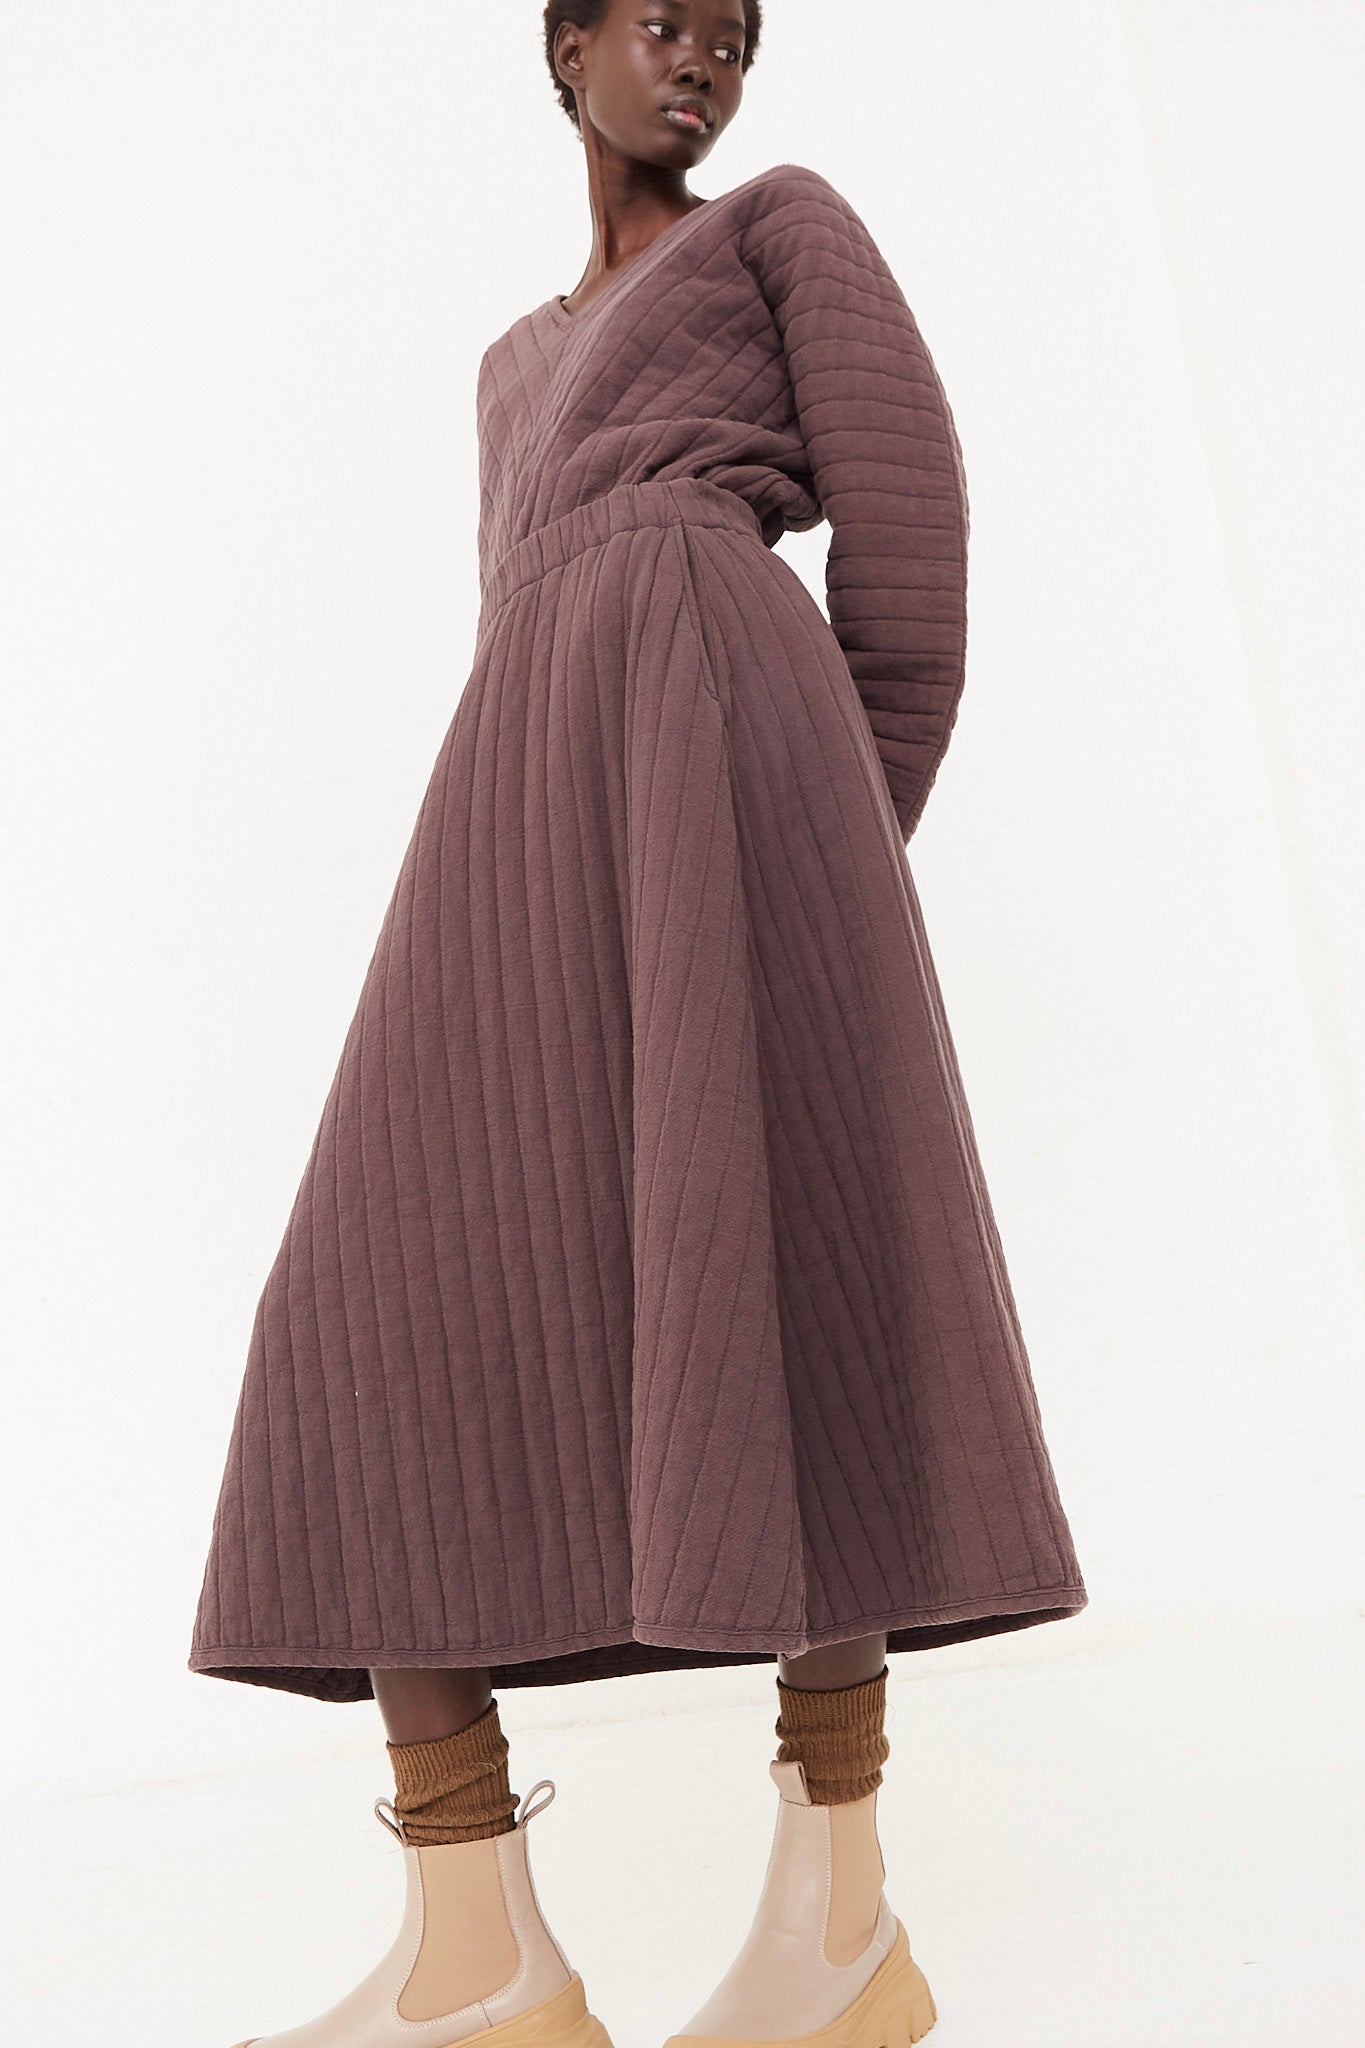 The model is wearing a brown quilted midi dress with an elasticated waist. 
Revised sentence: The model is wearing a plum quilted skirt with an elasticated waist by Black Crane.